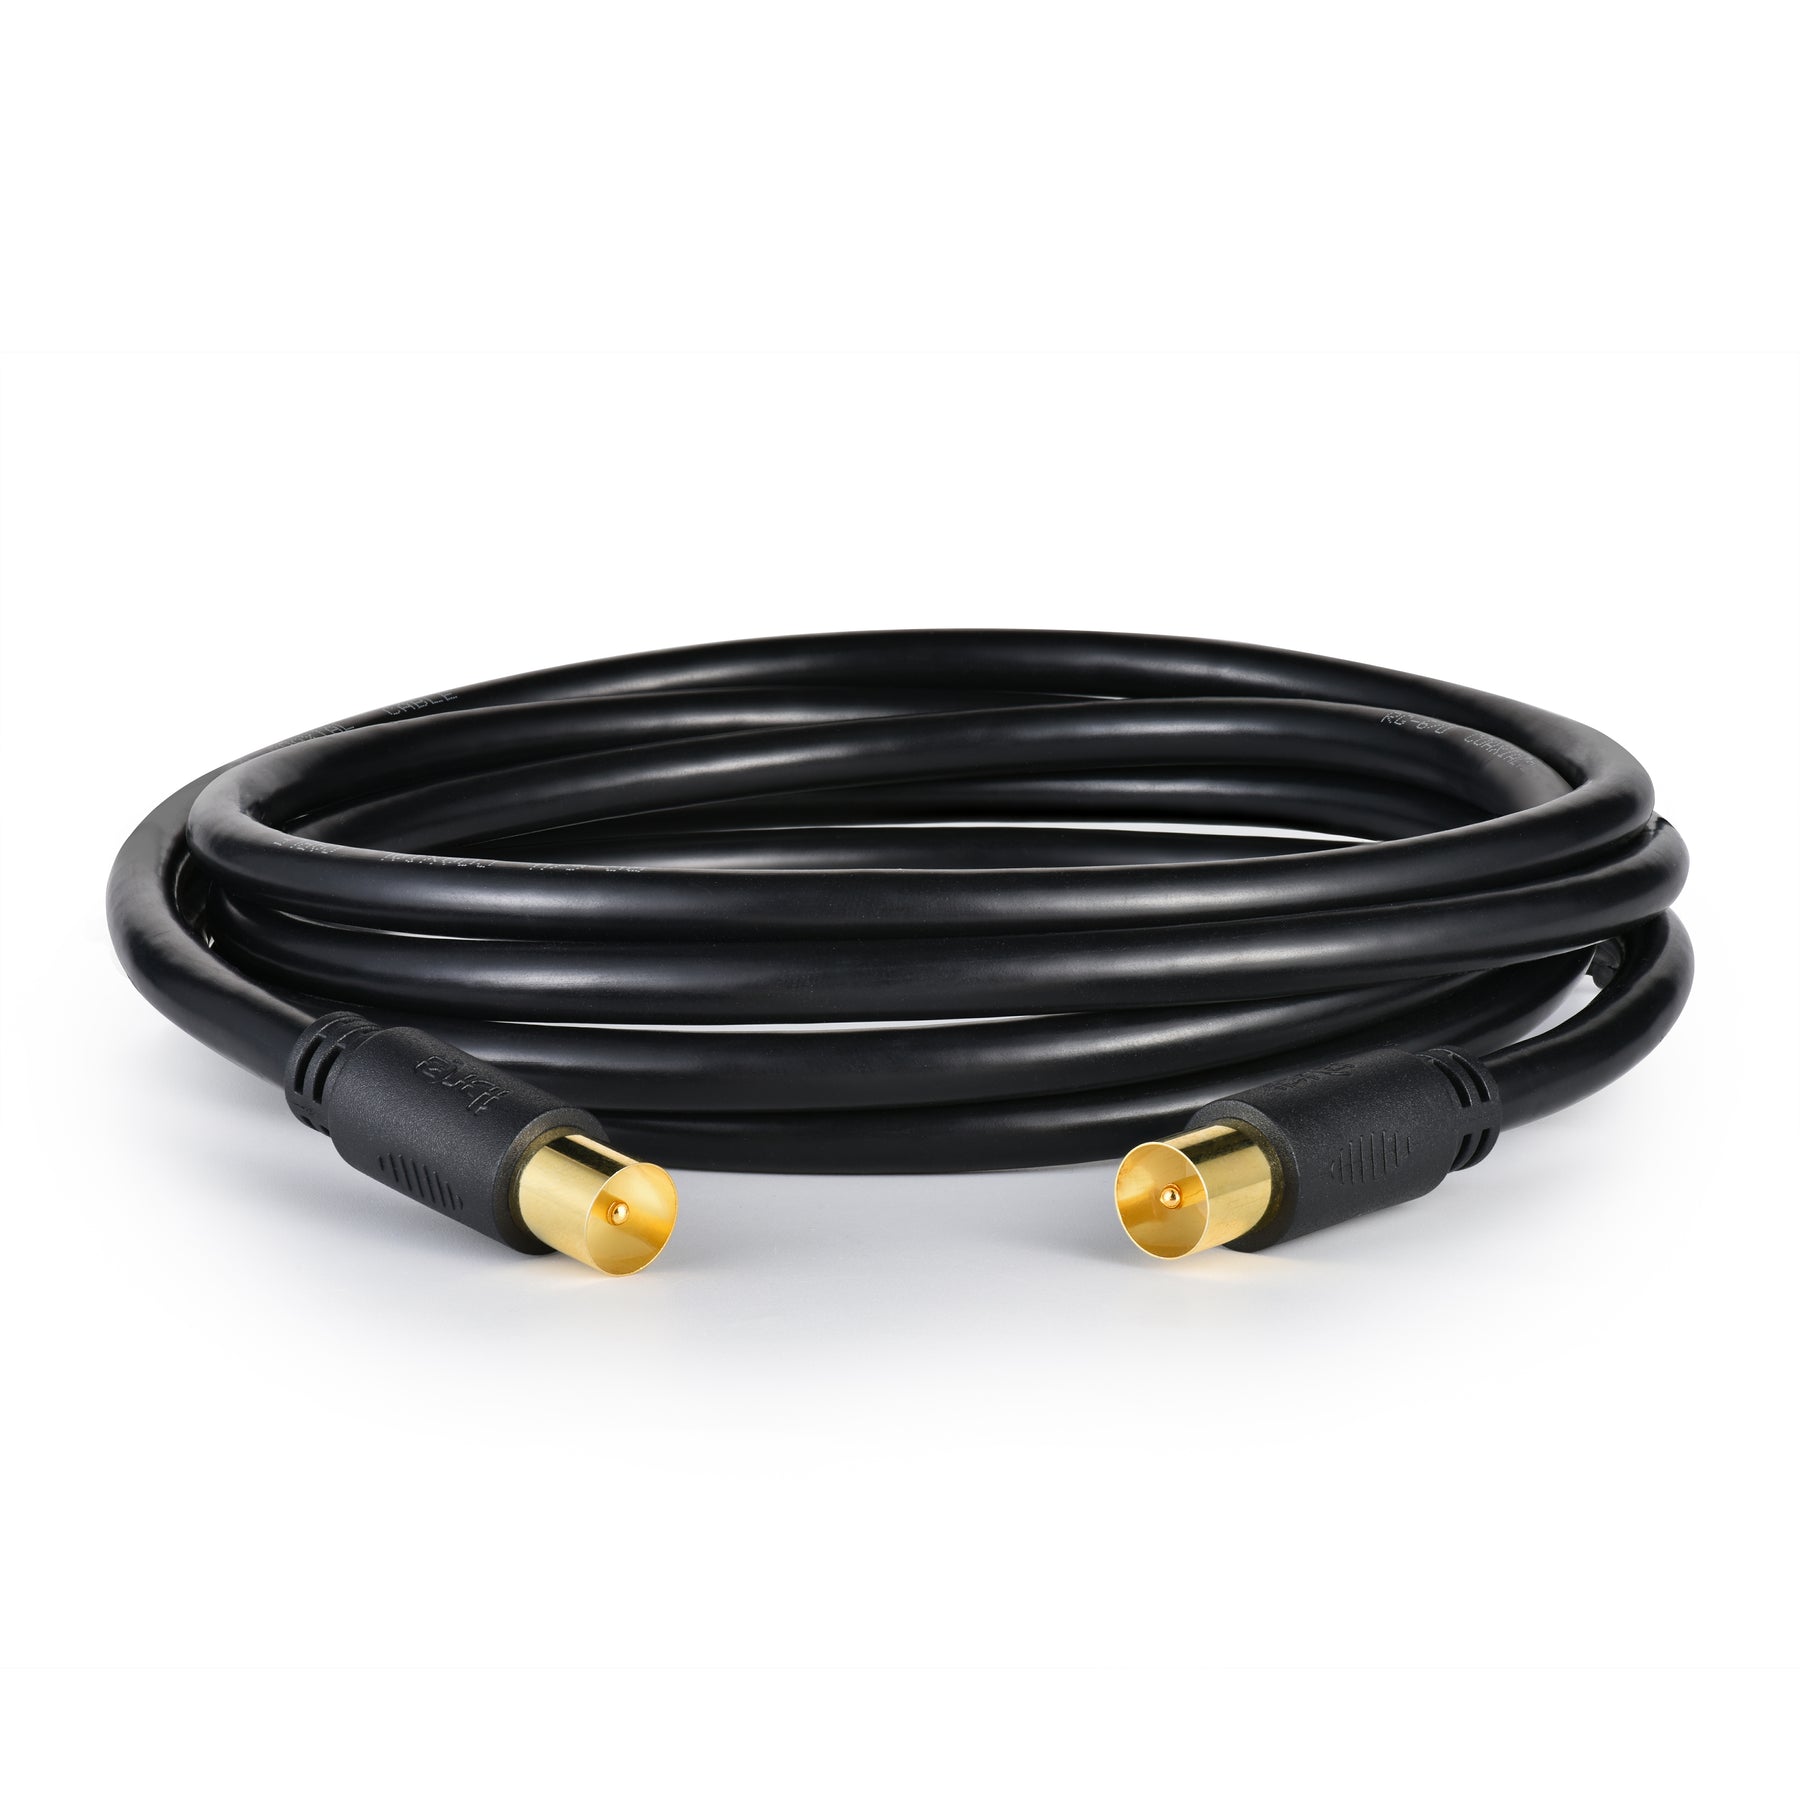 IBRA Aerial Coaxial Cable 2M with Gold-Plated Connectors, Male to Male RF Coax Lead with Female Adapter Coupler for Freeview, Freesat, Sky, Virgin, BT, You View, Satellite TV - Black